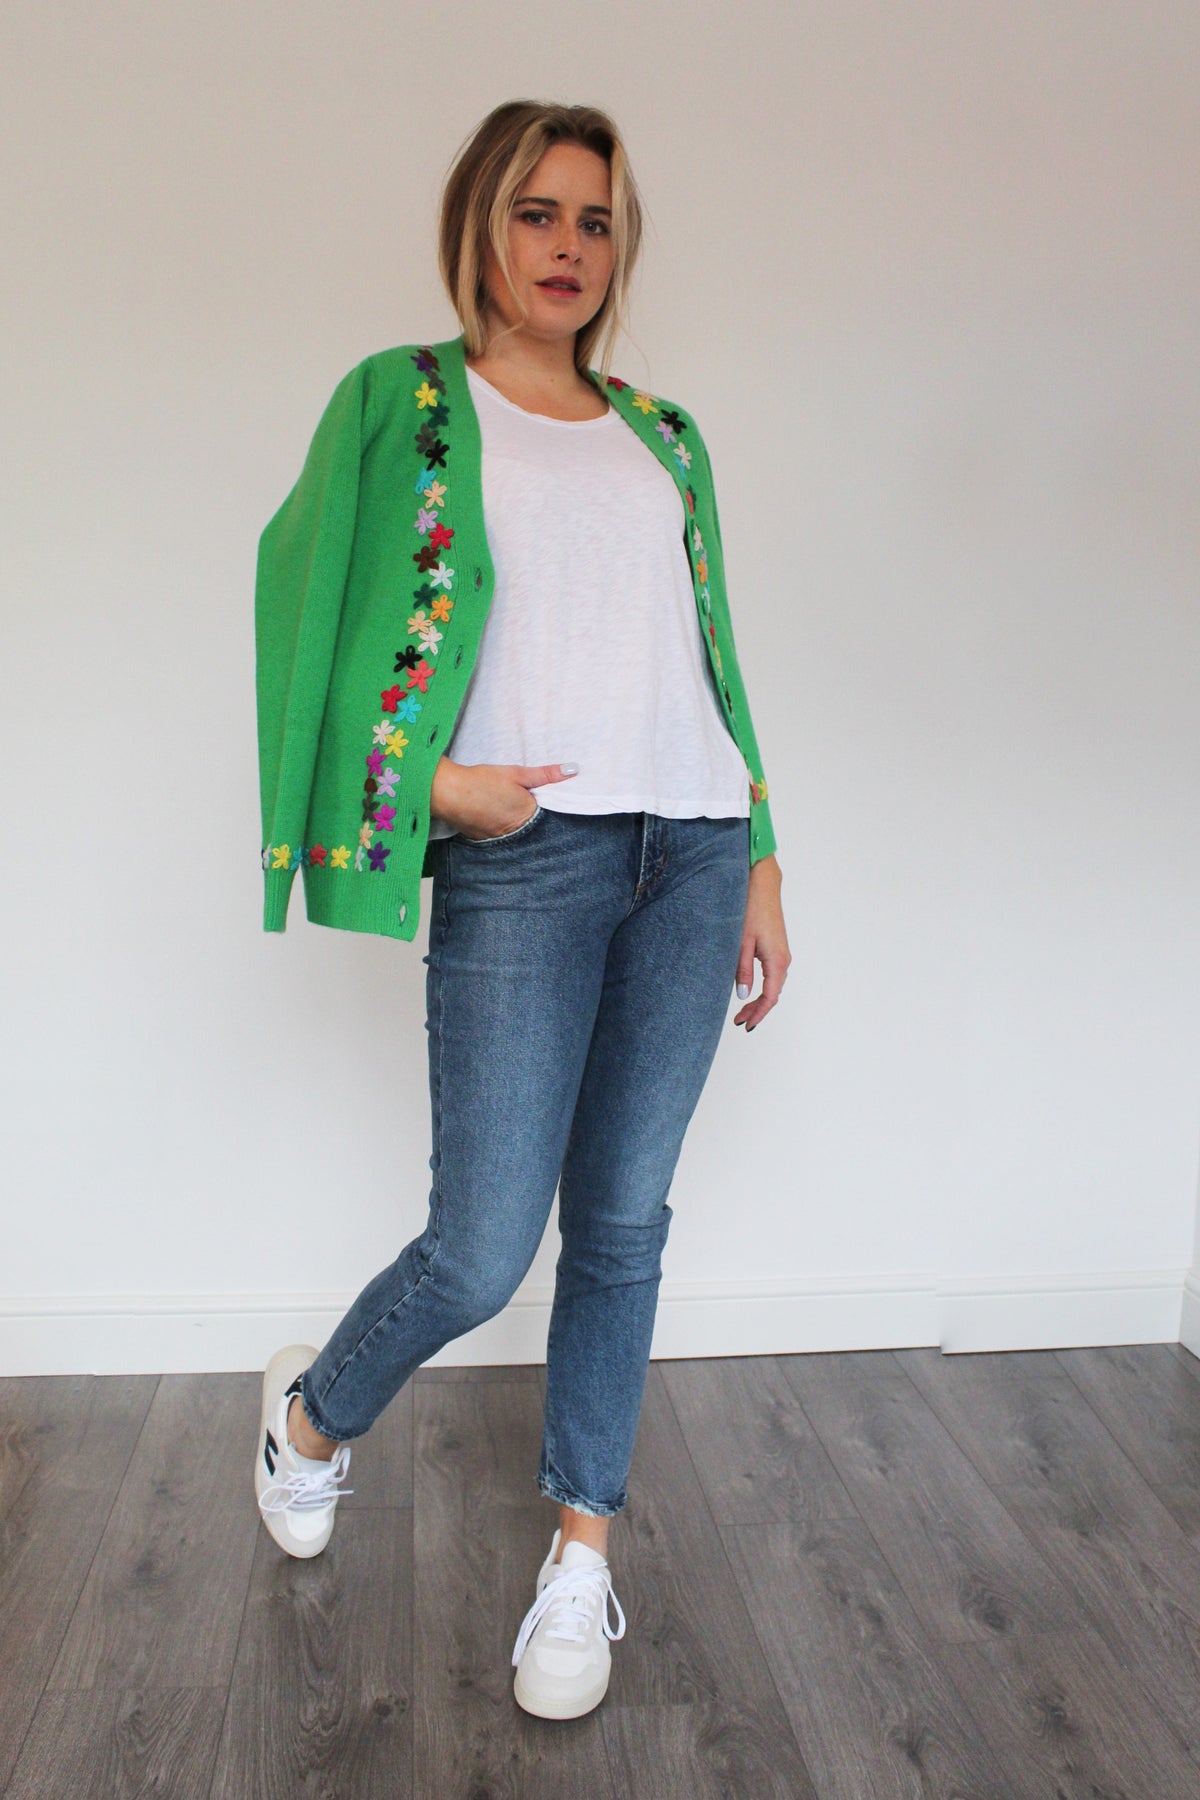 JU Embroidered Cardigan in Bright Green